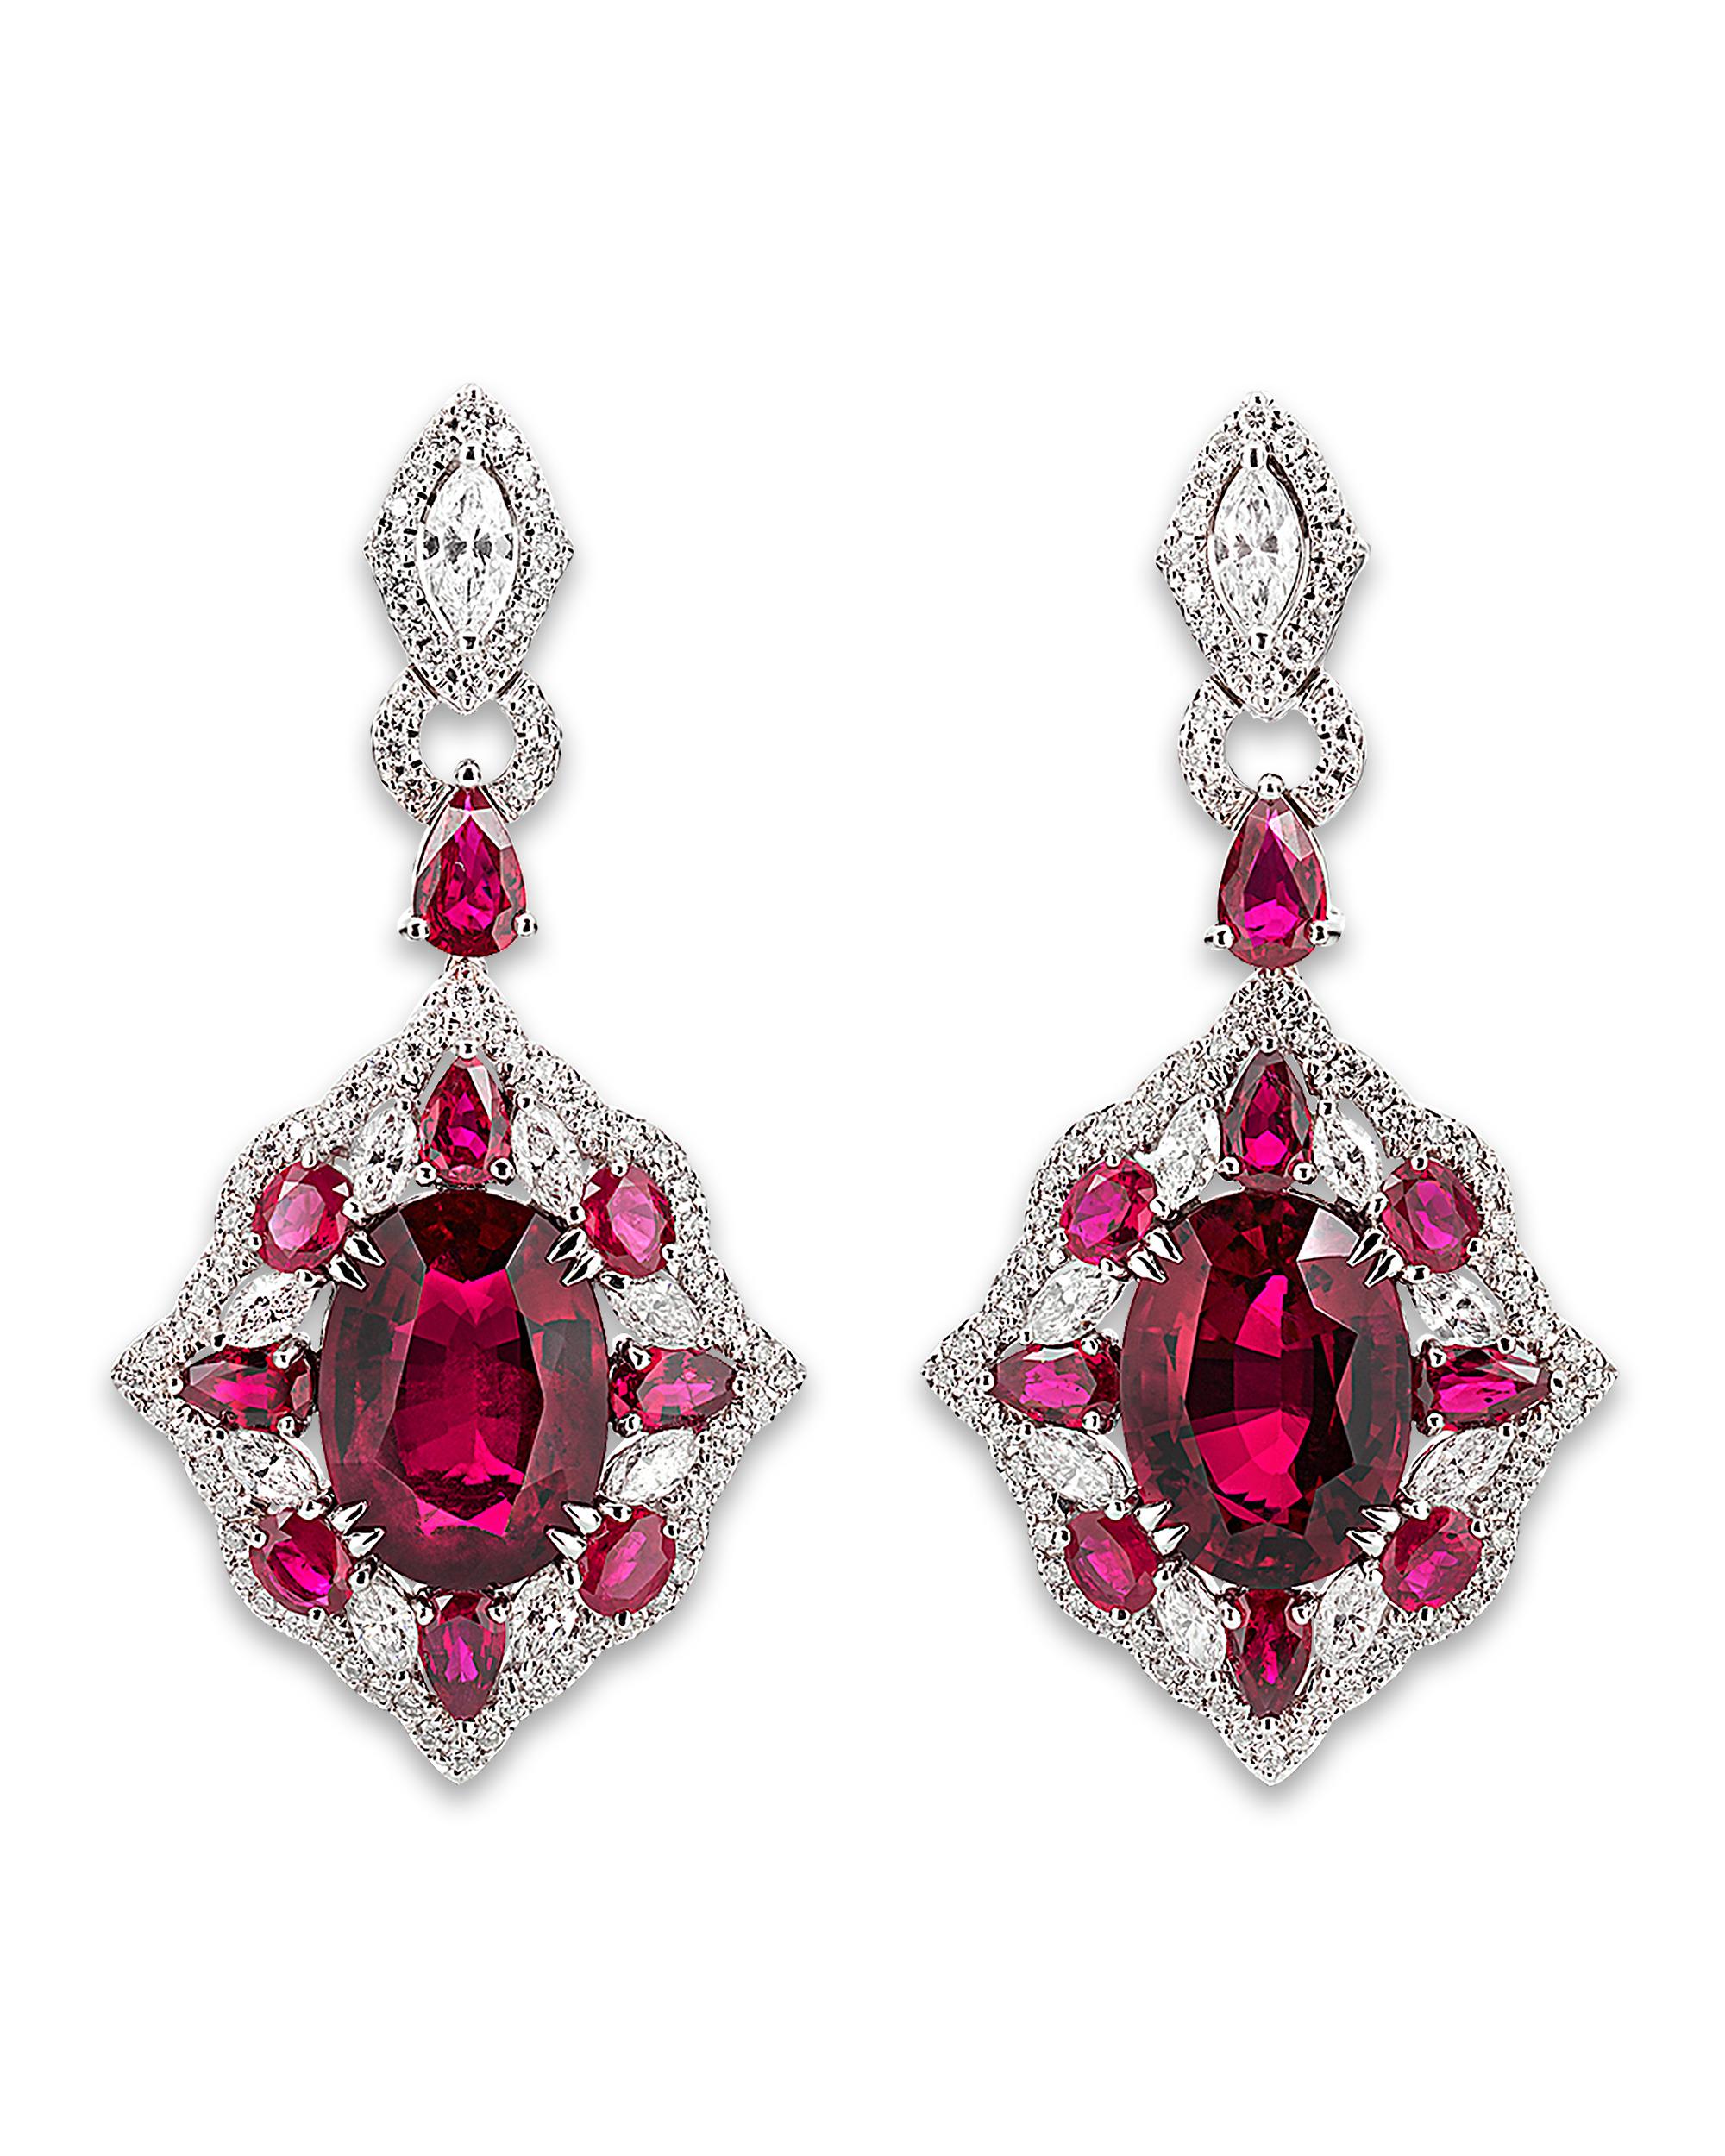 Oval Cut Rubellite And Diamond Earrings, 11.15 Carats